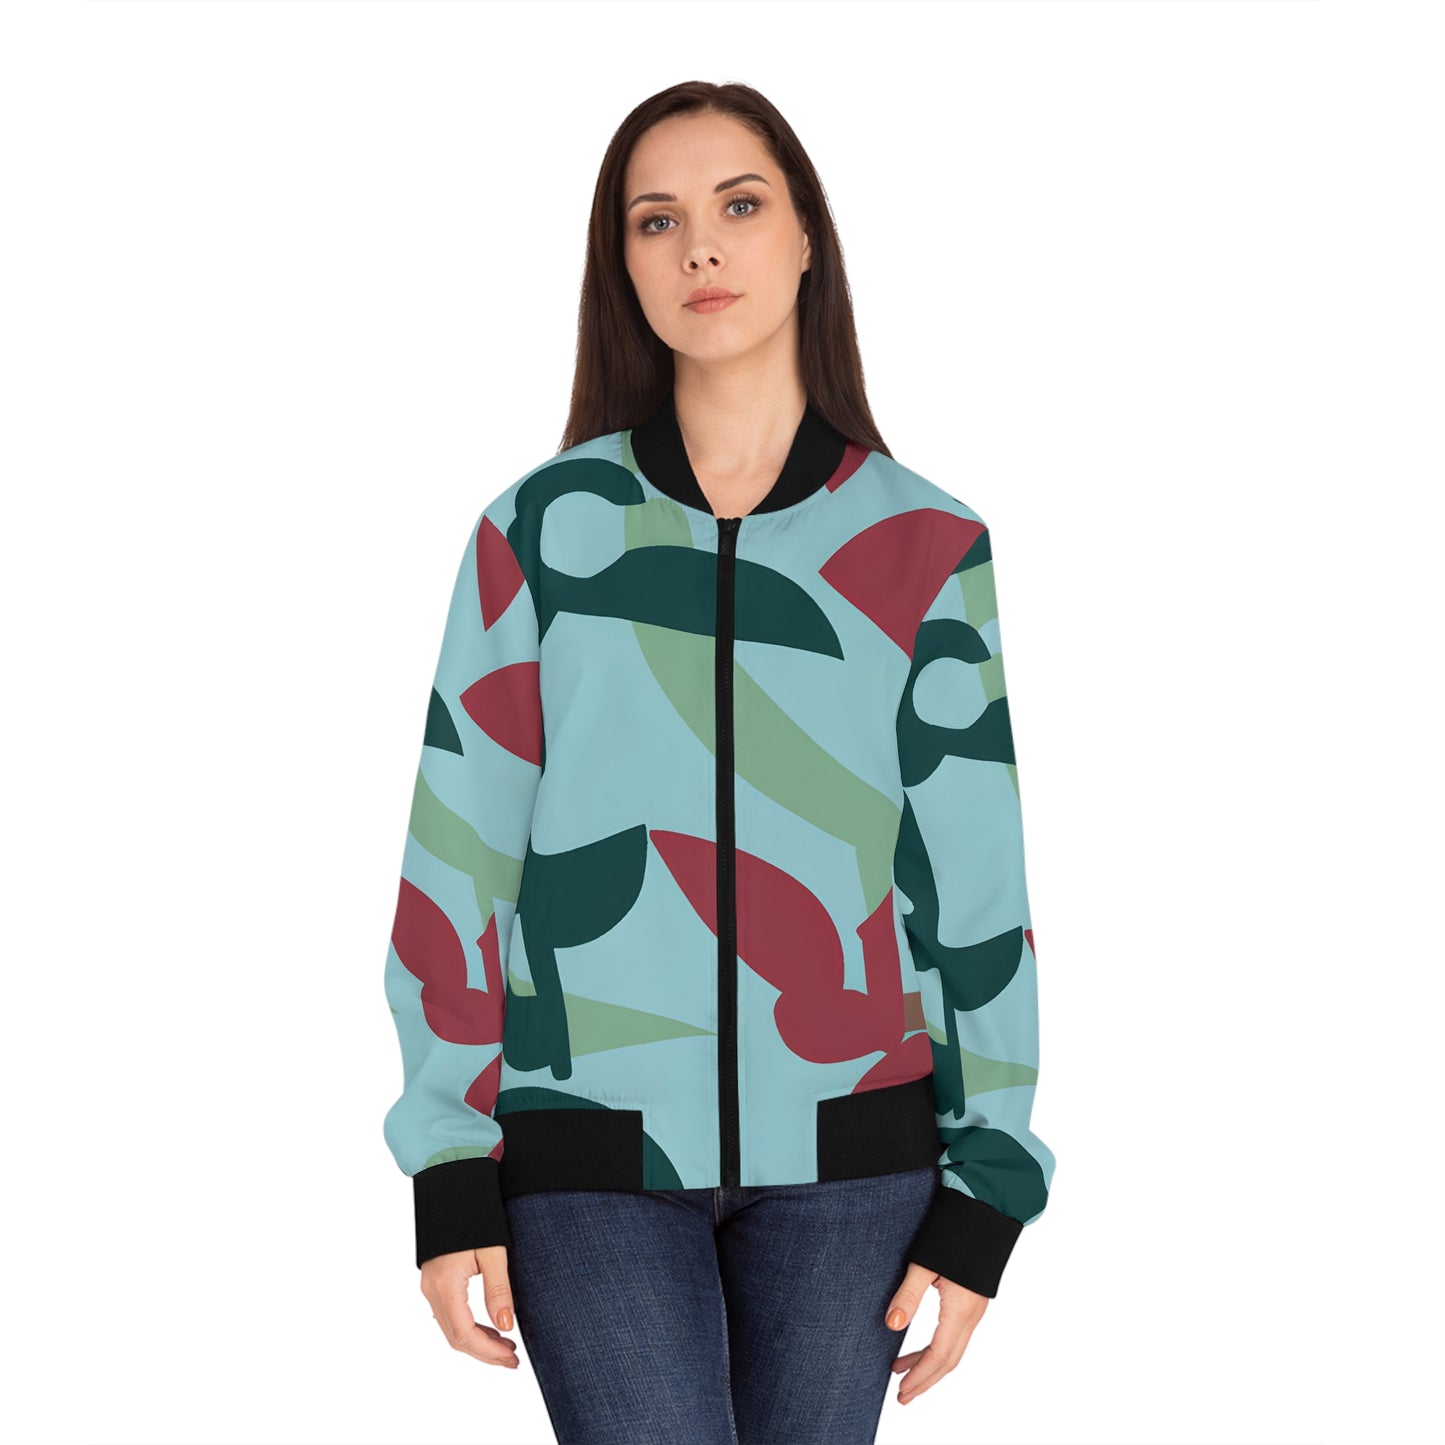 Chaparral Ione - Women's Bomber Jacket